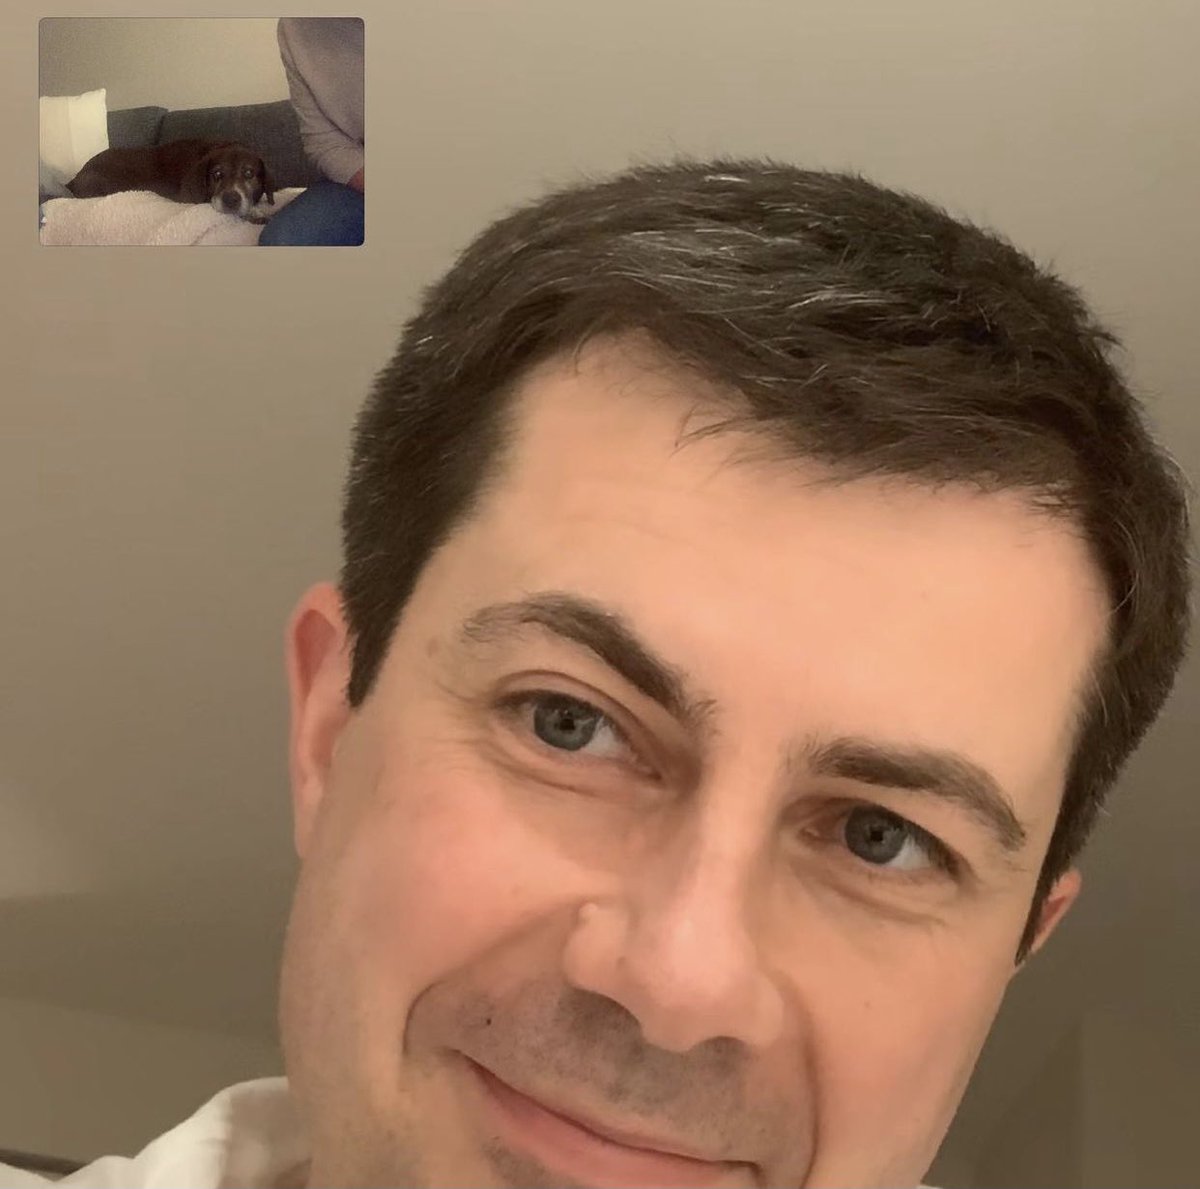 @firstdogsSB Buddy and Truman Zooming with dad this morning @Chasten @PeteButtigieg #Zoom #MissingDad #LGBTQ #BuddyButtigieg #TrumanButtigieg